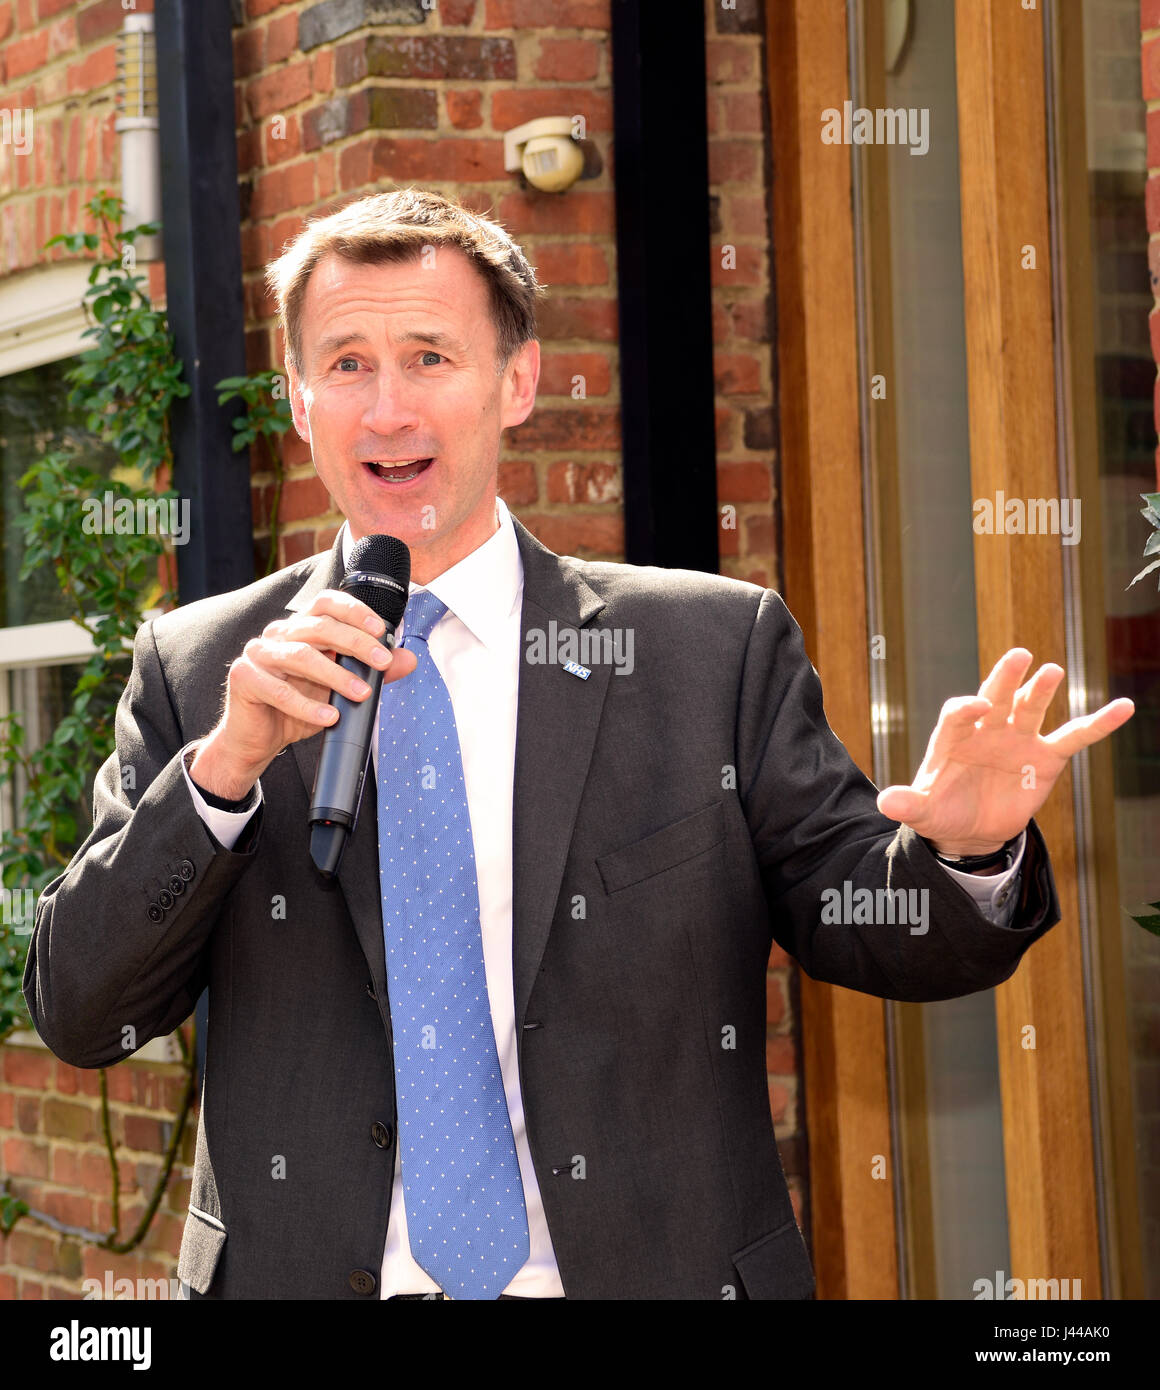 Conservative MP & Secretary of State for Health Jeremy Hunt speaking at the opening of a new health consultancy, Farnham, Surrey, UK. 05.05.2017. Stock Photo